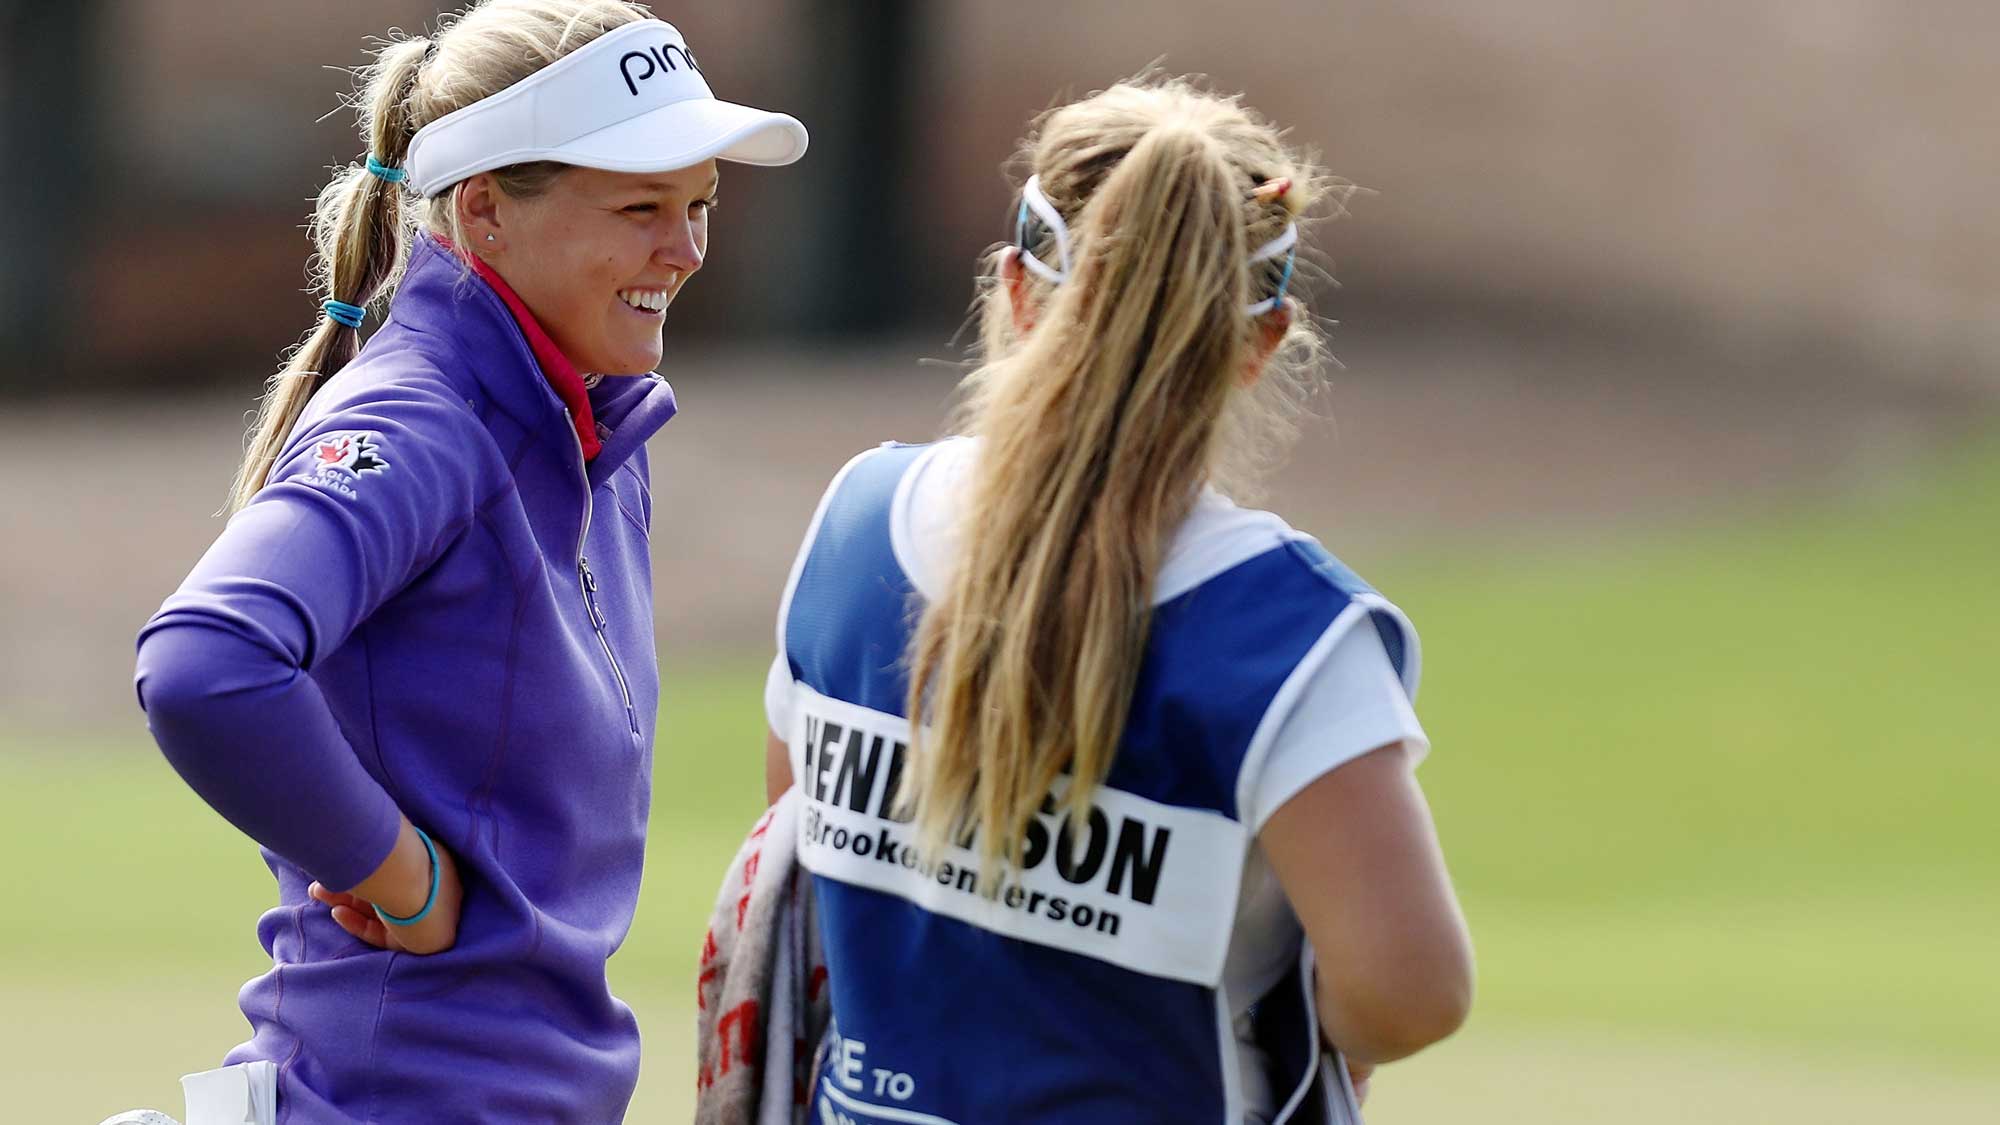 Brooke Henderson of Canada talks with her caddie on the 11th hole during the second round of the CME Group Tour Championship at Tiburon Golf Club